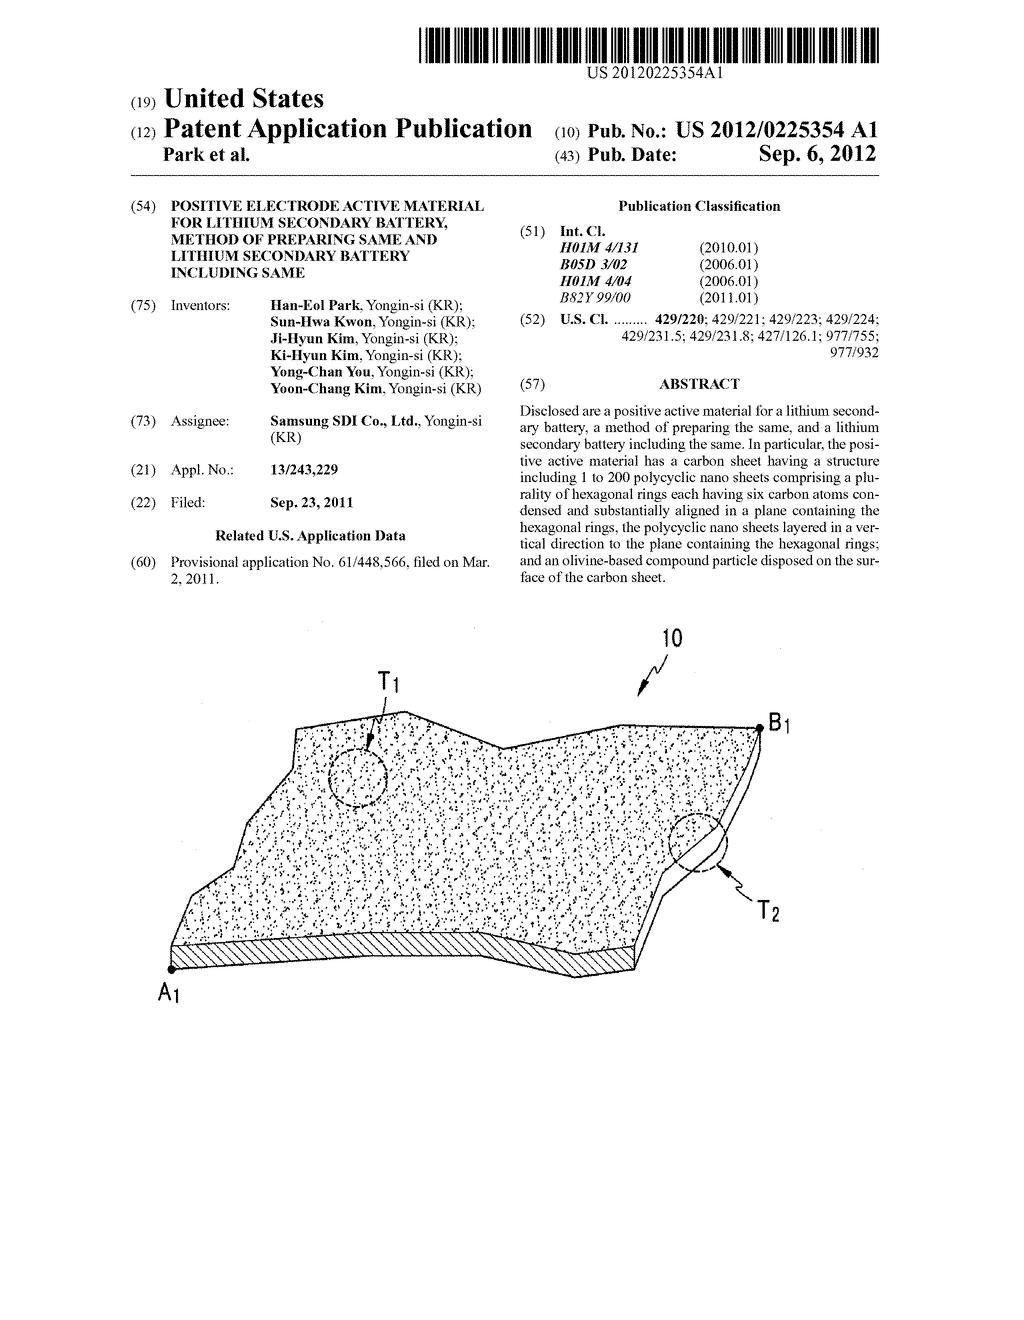 POSITIVE ELECTRODE ACTIVE MATERIAL FOR LITHIUM SECONDARY BATTERY, METHOD     OF PREPARING SAME AND LITHIUM SECONDARY BATTERY INCLUDING SAME - diagram, schematic, and image 01